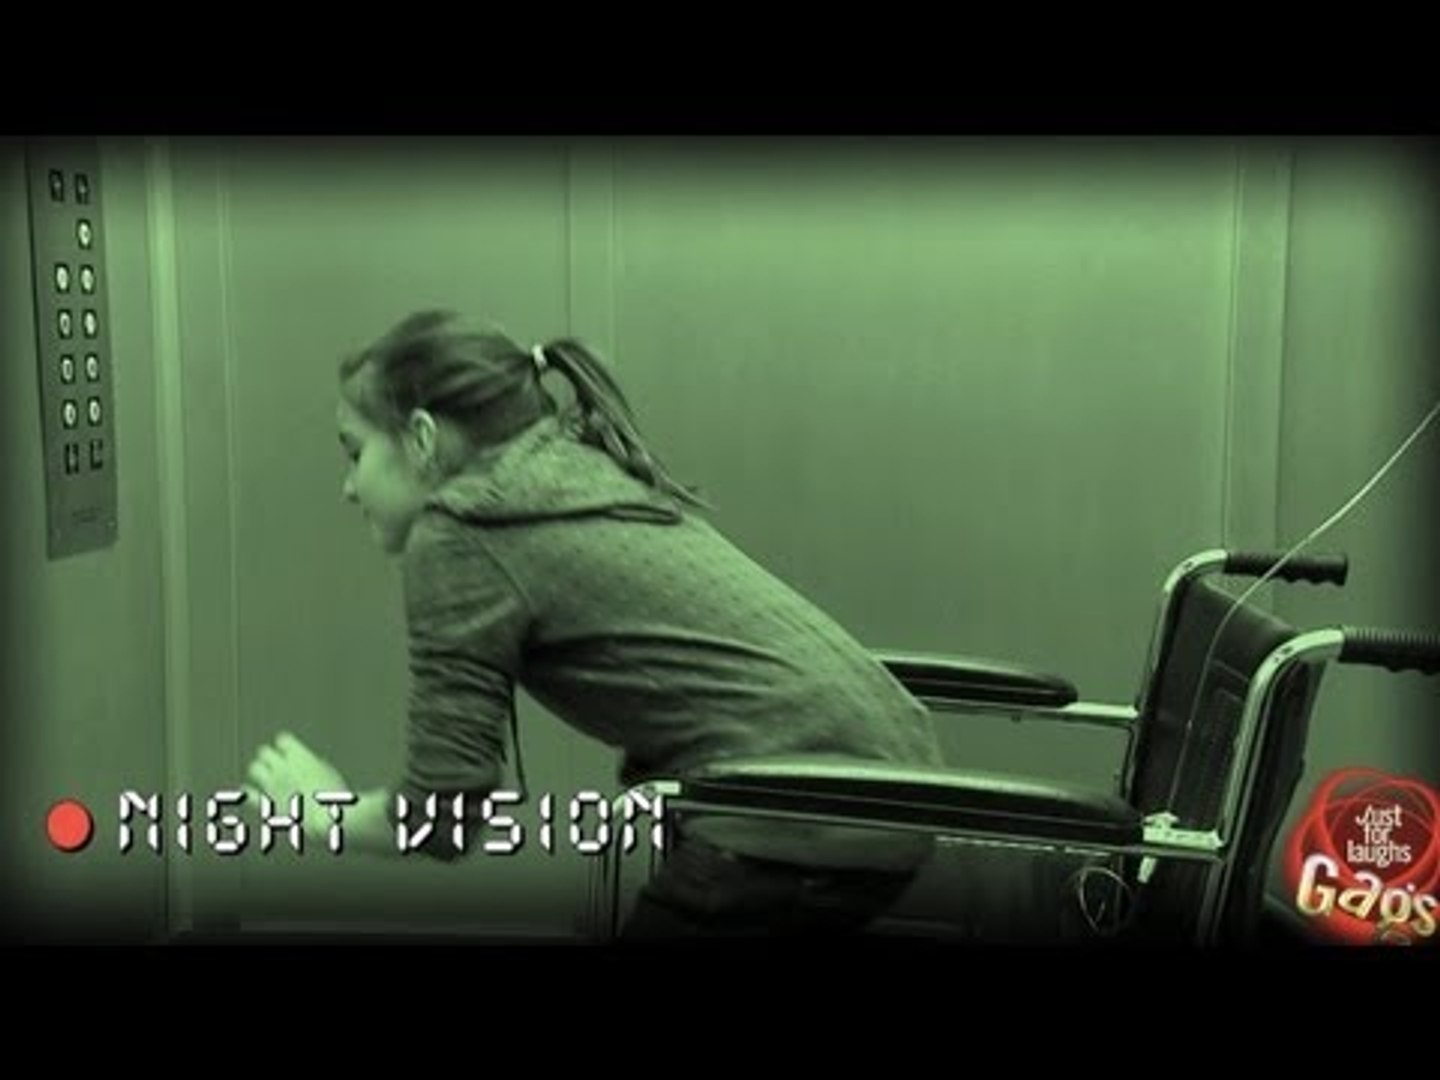 Best Elevator Pranks - Best Of Just For Laughs Gags